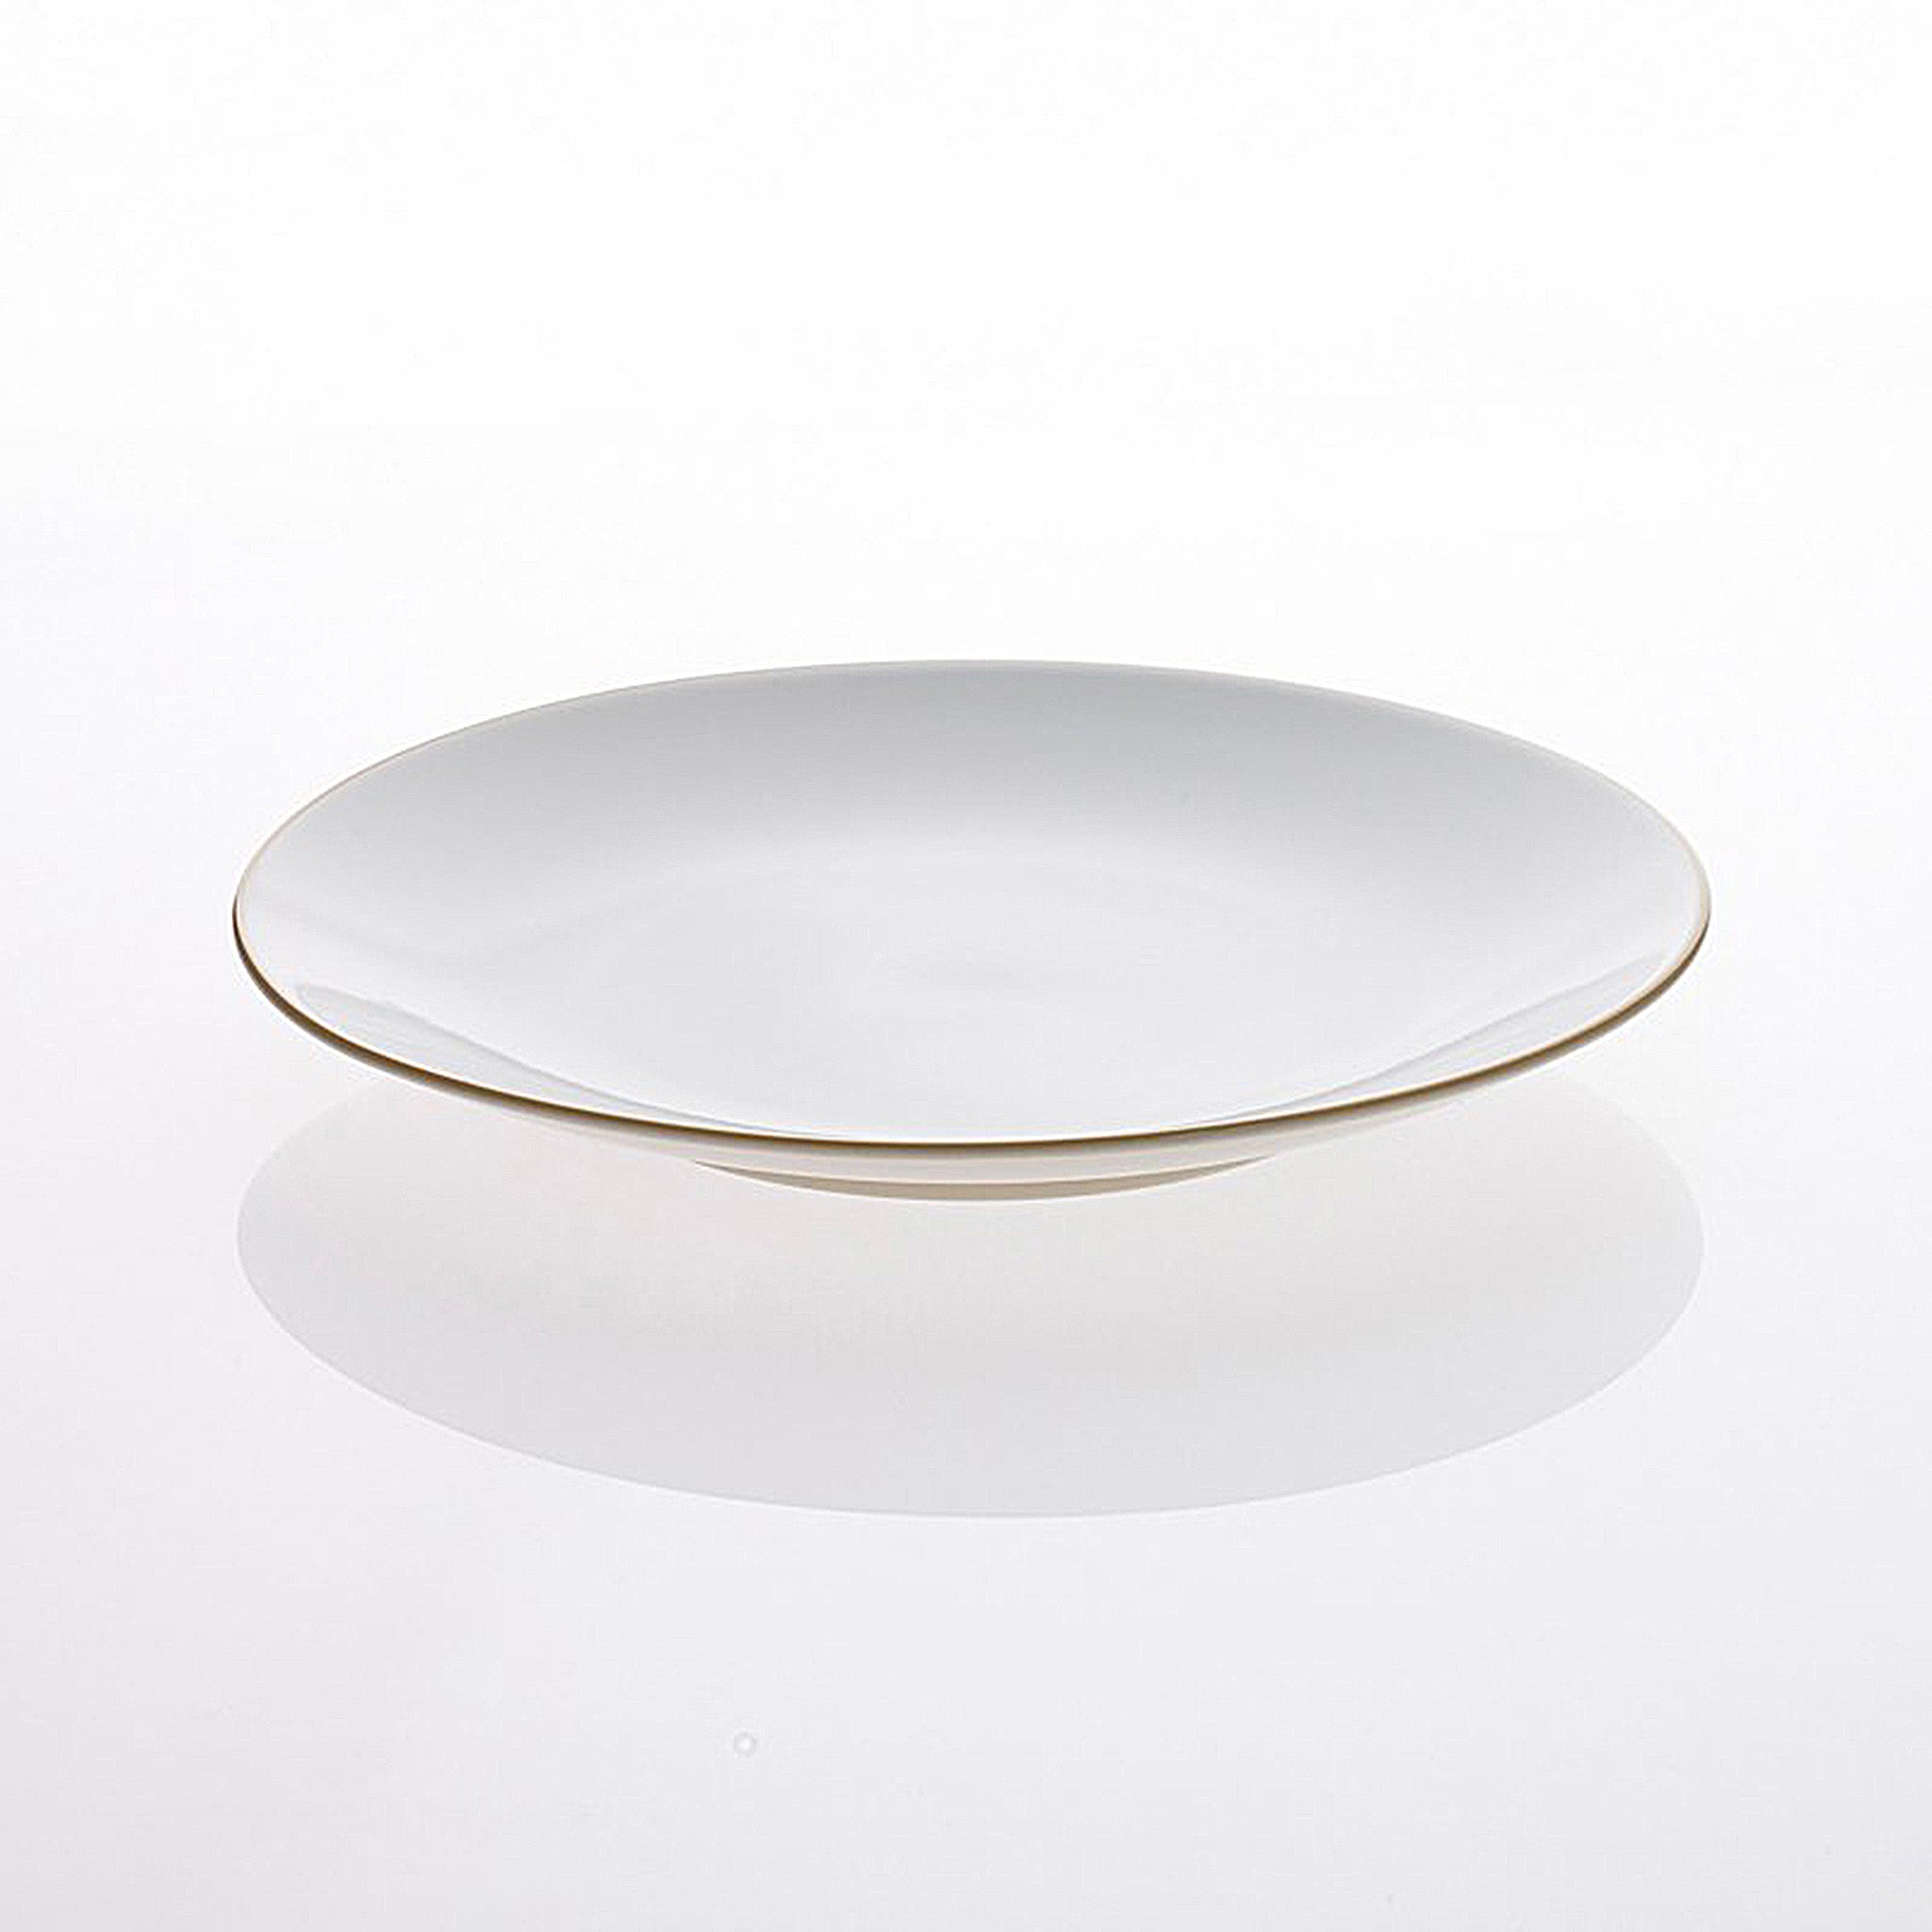 Oyyo large bone China dinner plate by Teroforma from Abode New York.